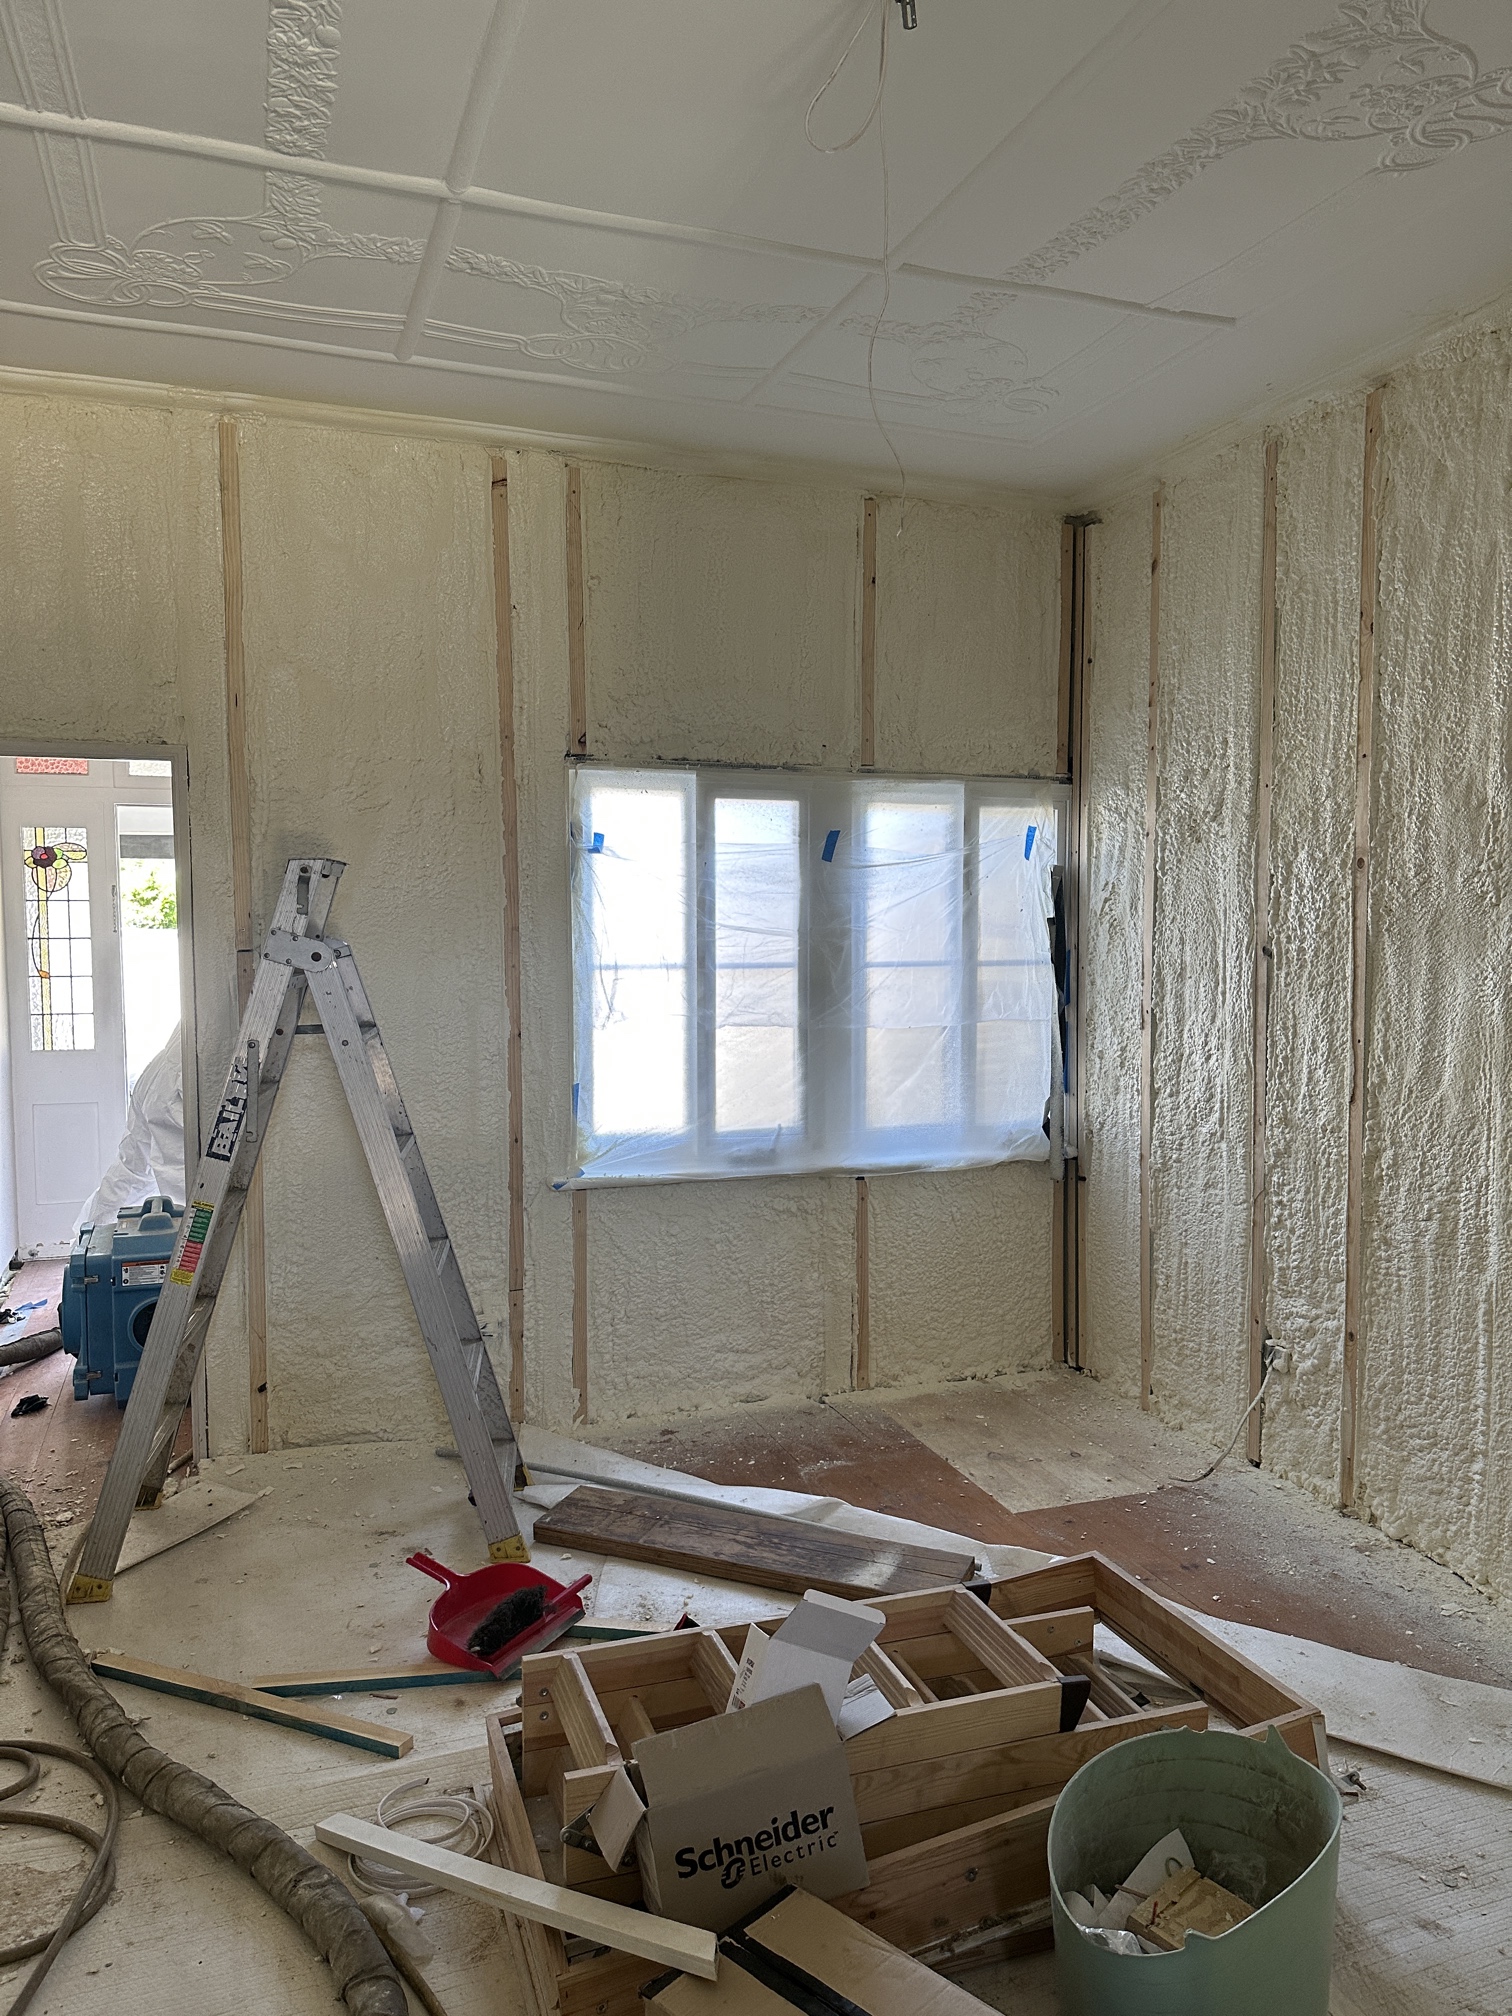 The Role of Proper Ventilation with Spray Foam Insulation